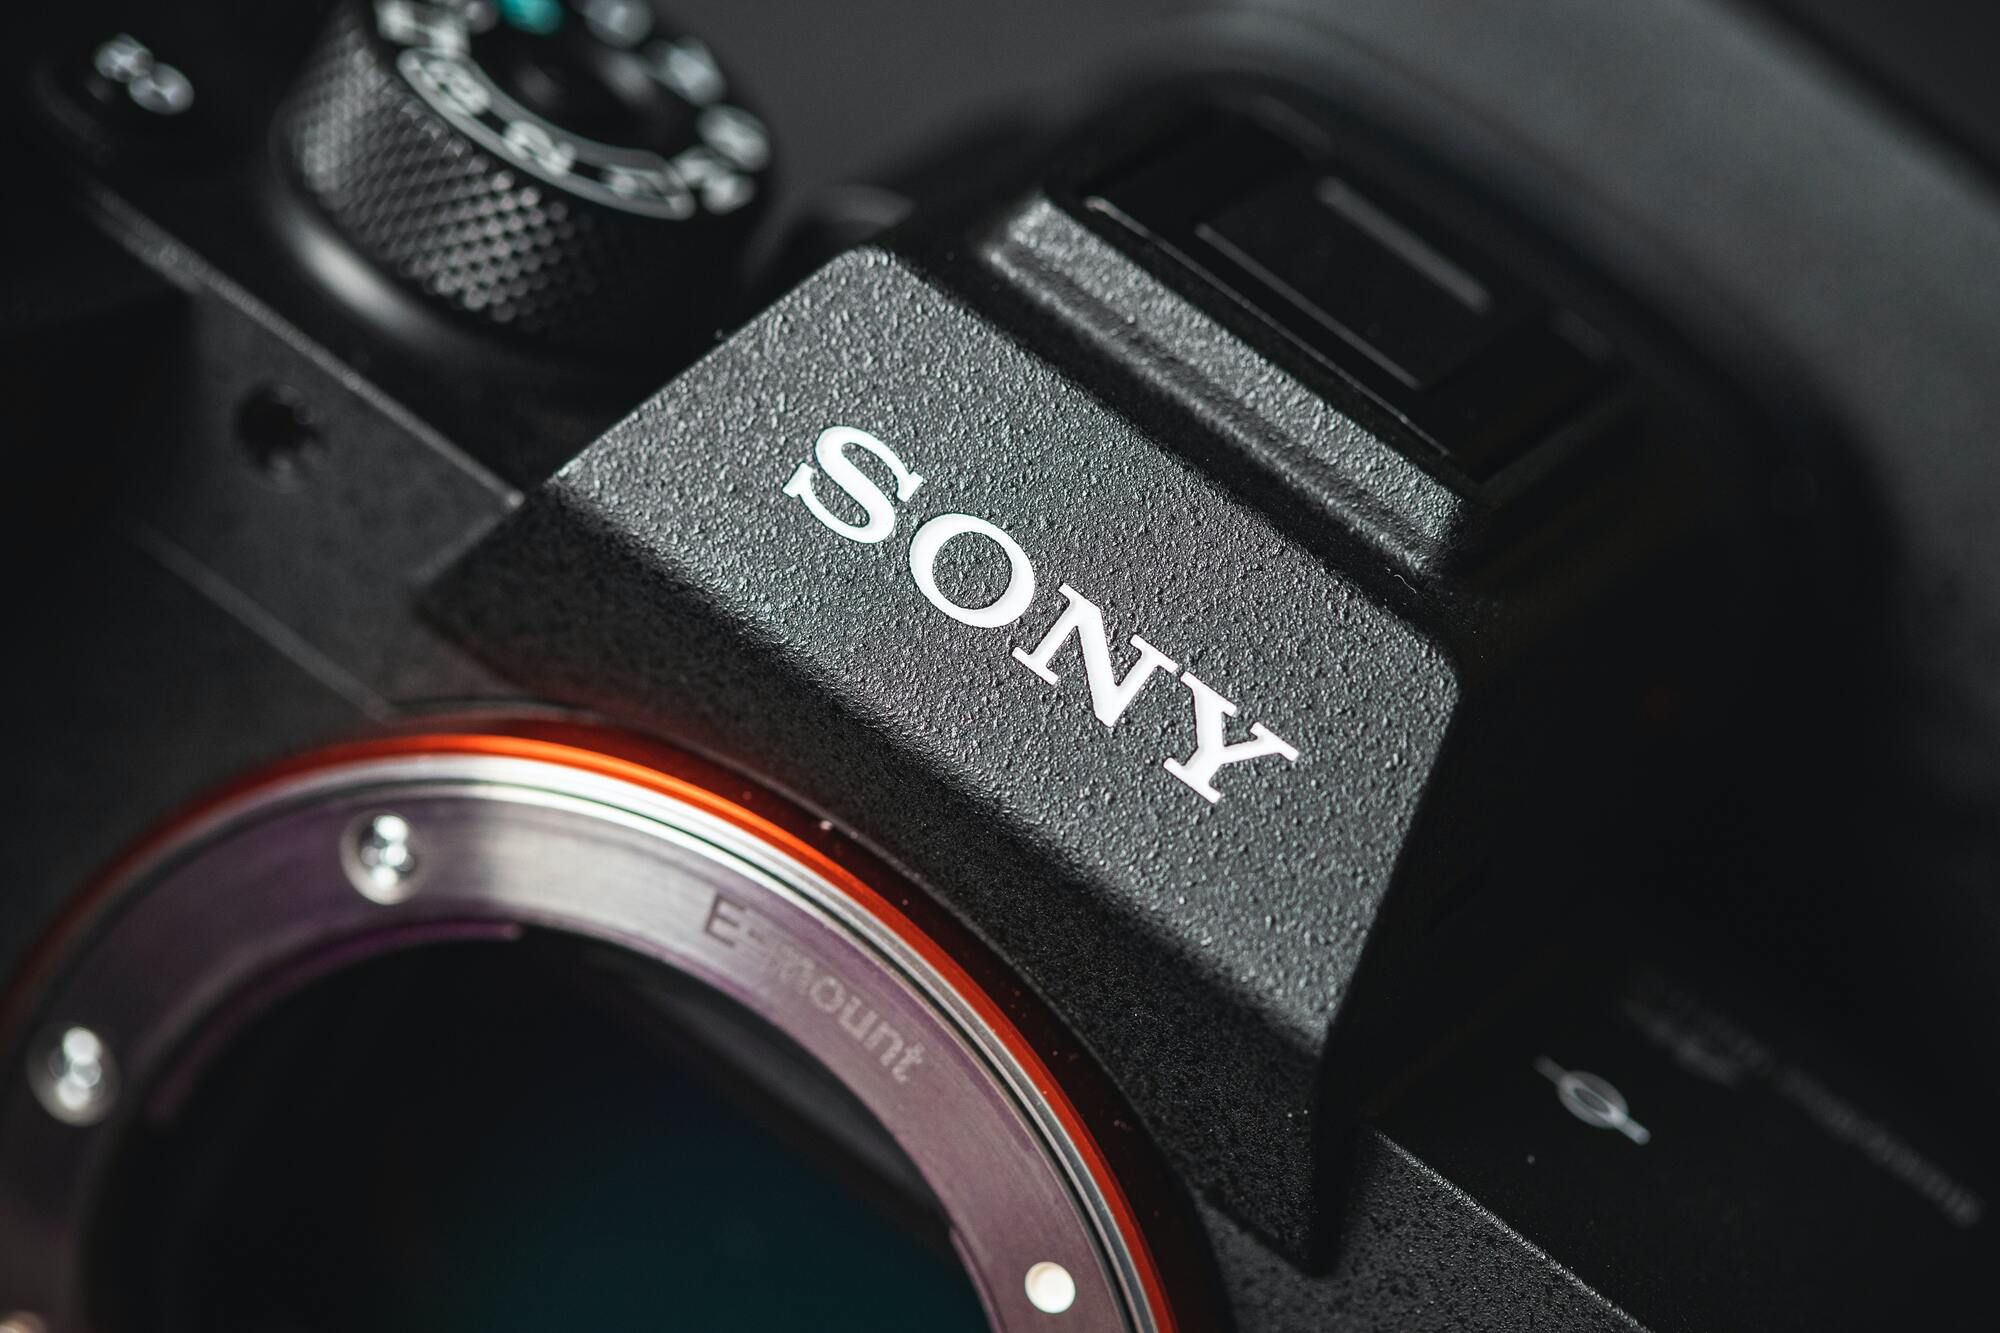 Sony Alpha Gear | Cameras, Lenses, Memory Cards and More